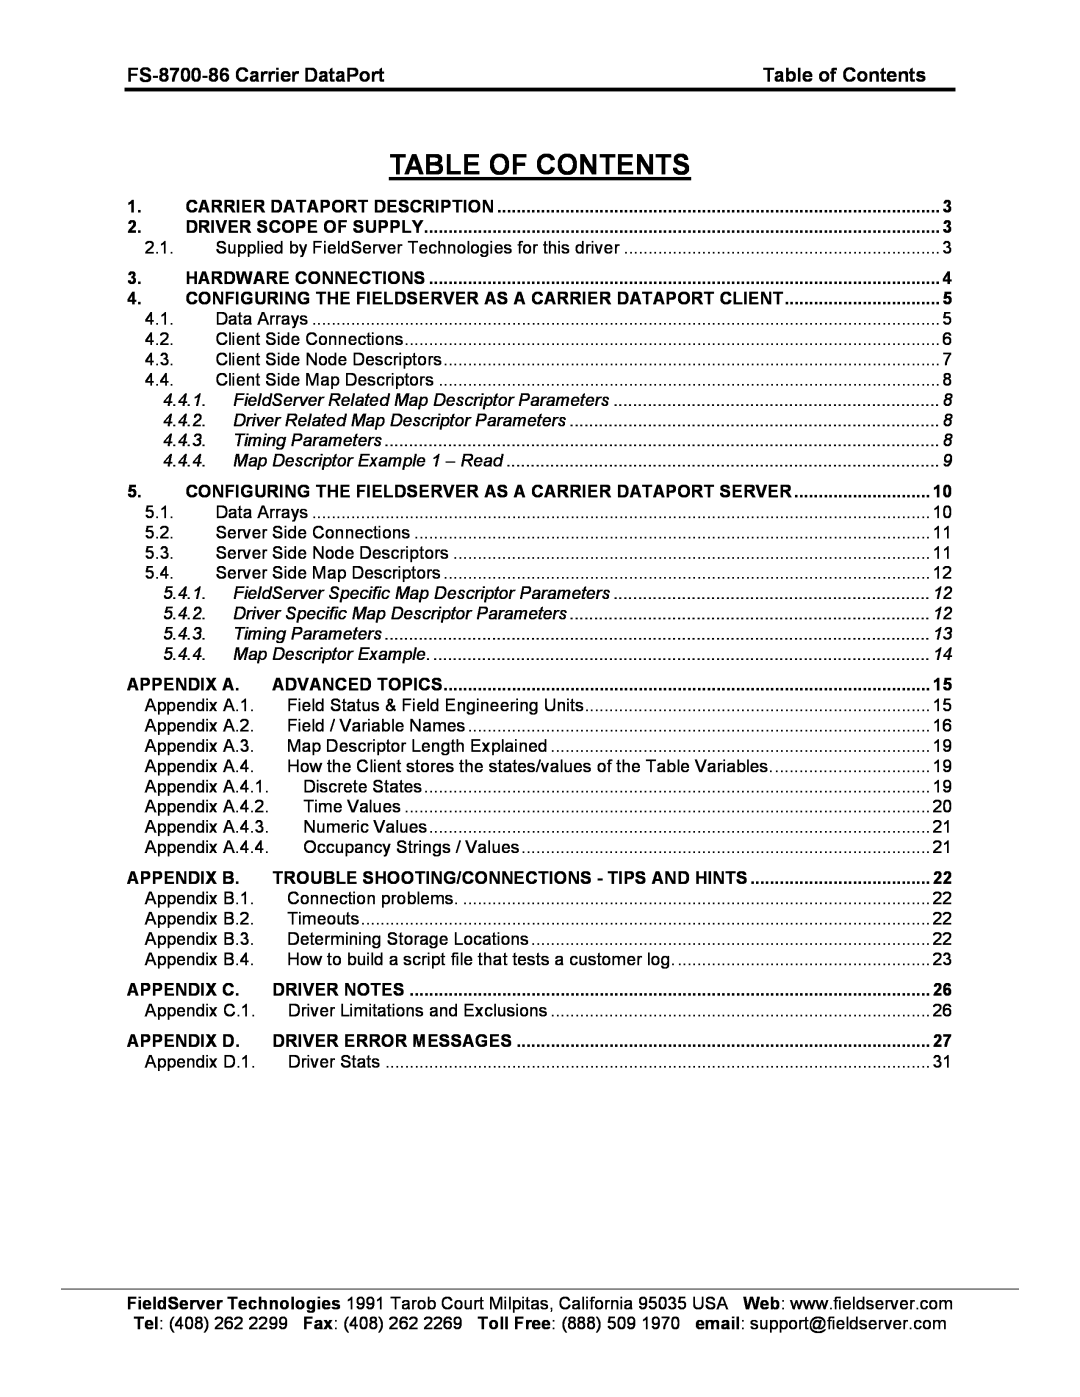 FieldServer instruction manual FS-8700-86 Carrier DataPort, Table of Contents, Table Of Contents 